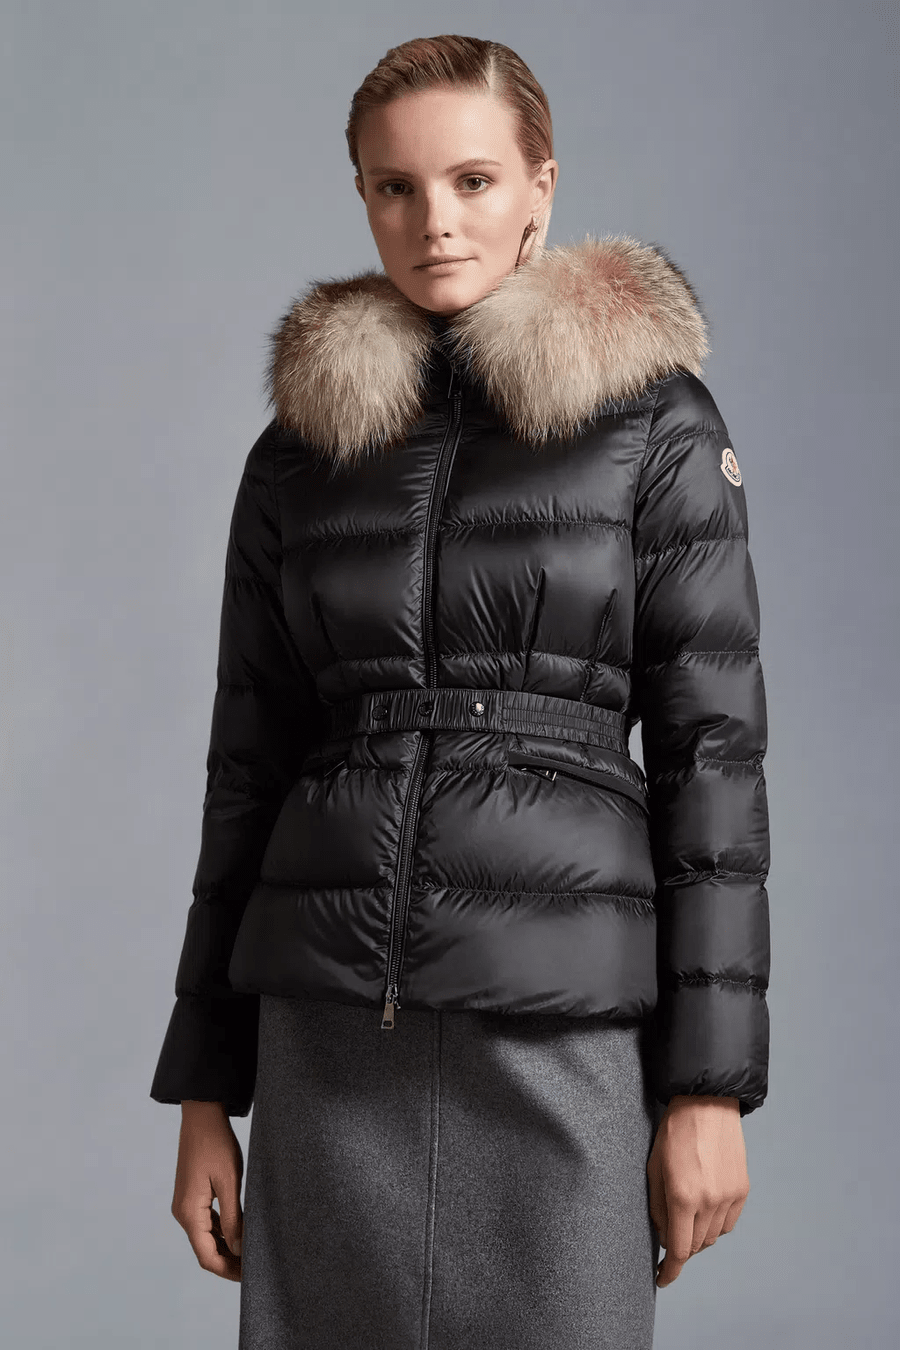 Chic Luxury Puffer Jackets for Women in Their 30s – Moncler, Burberry